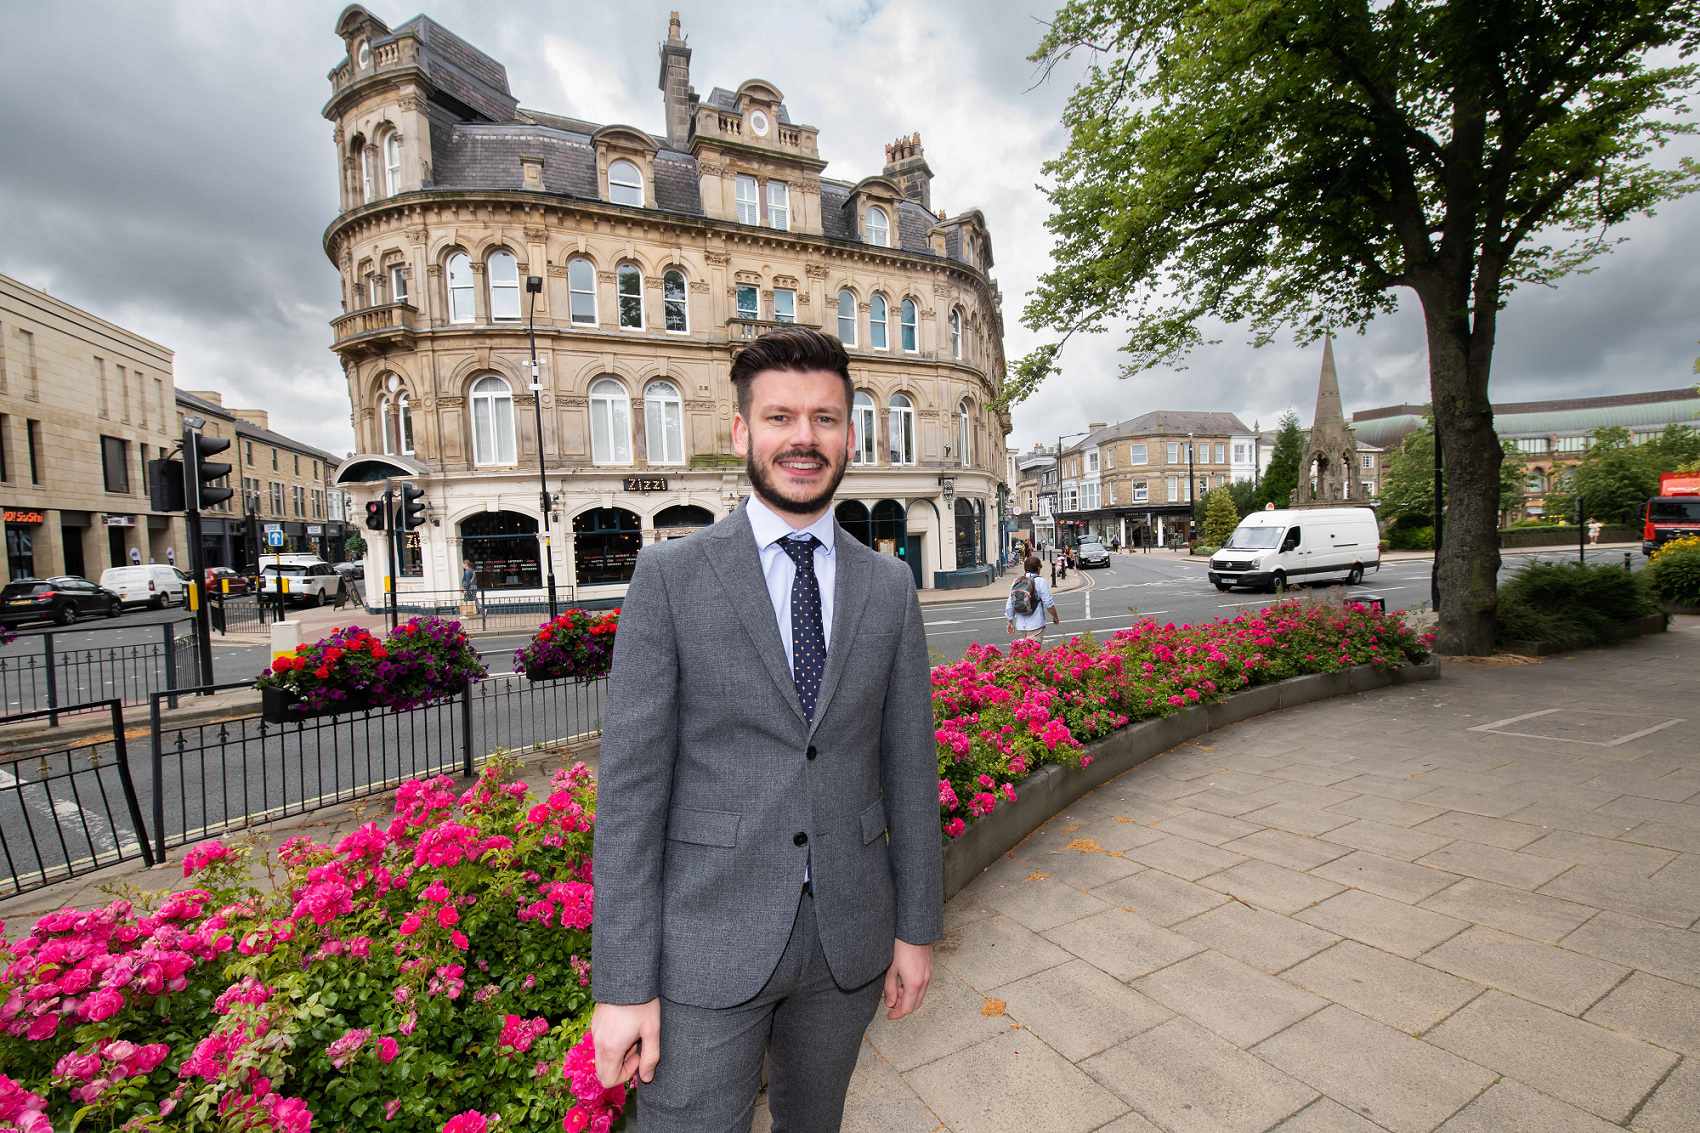 North Yorkshire Council’s executive member for highways and transport, Cllr Keane Duncan, in Harrogate town centre